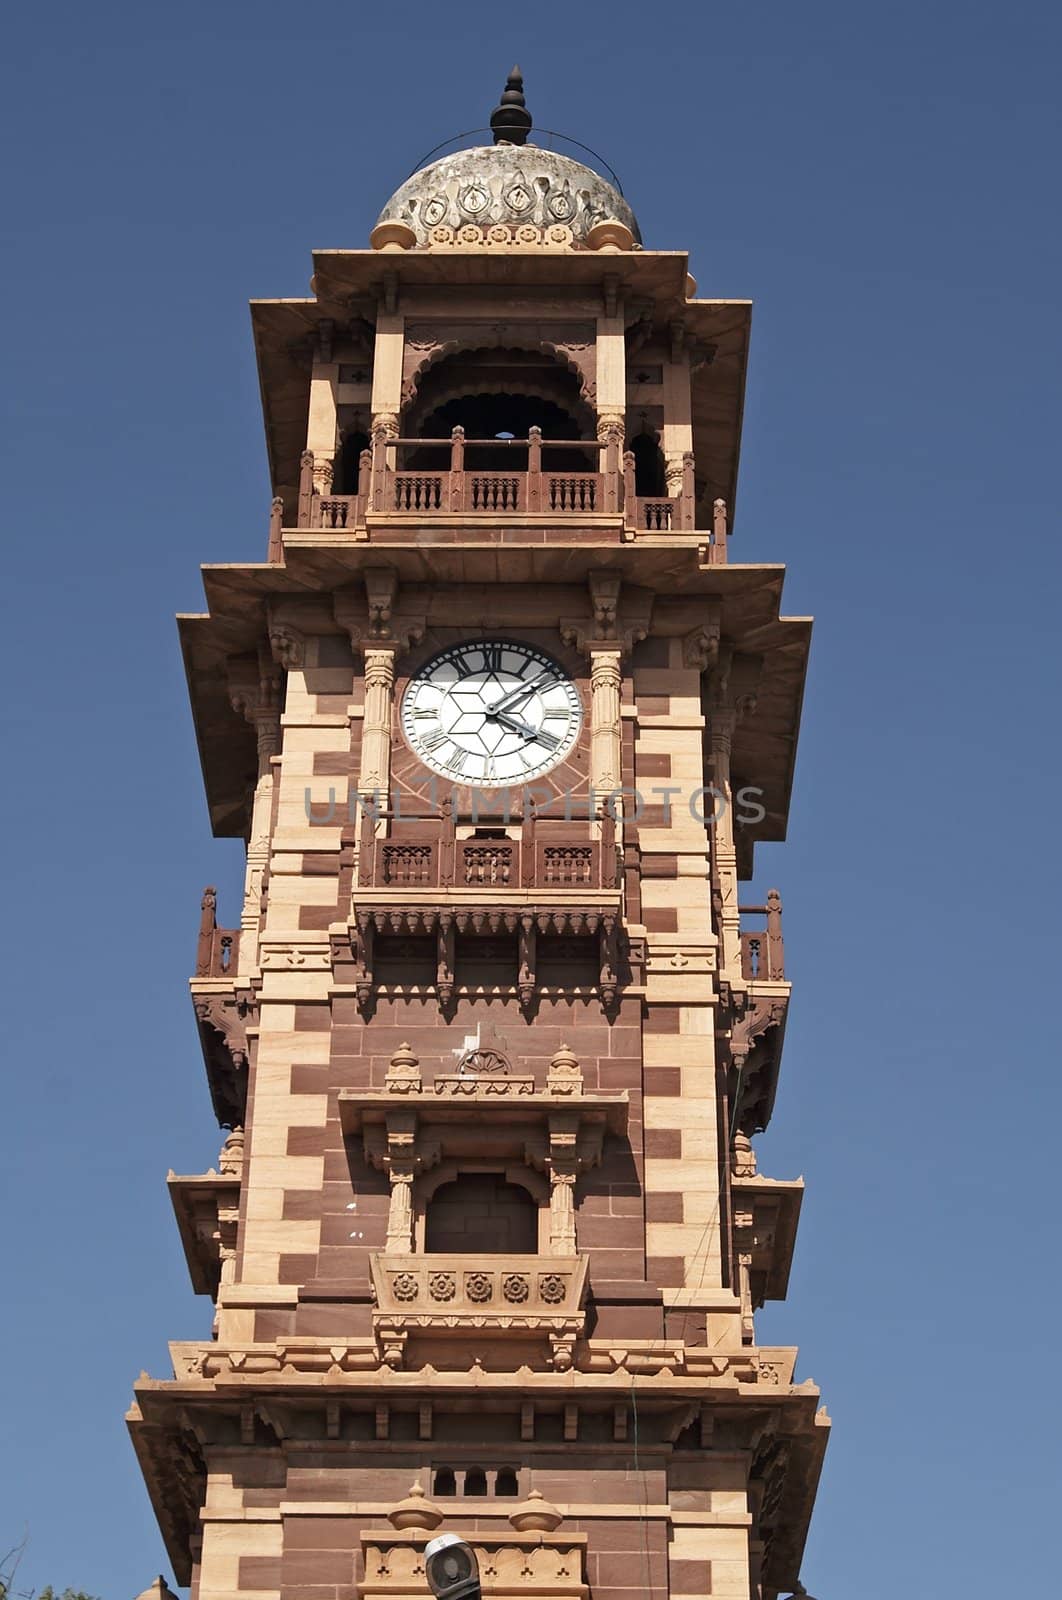 Clock tower in central market square of Jodhpur, India